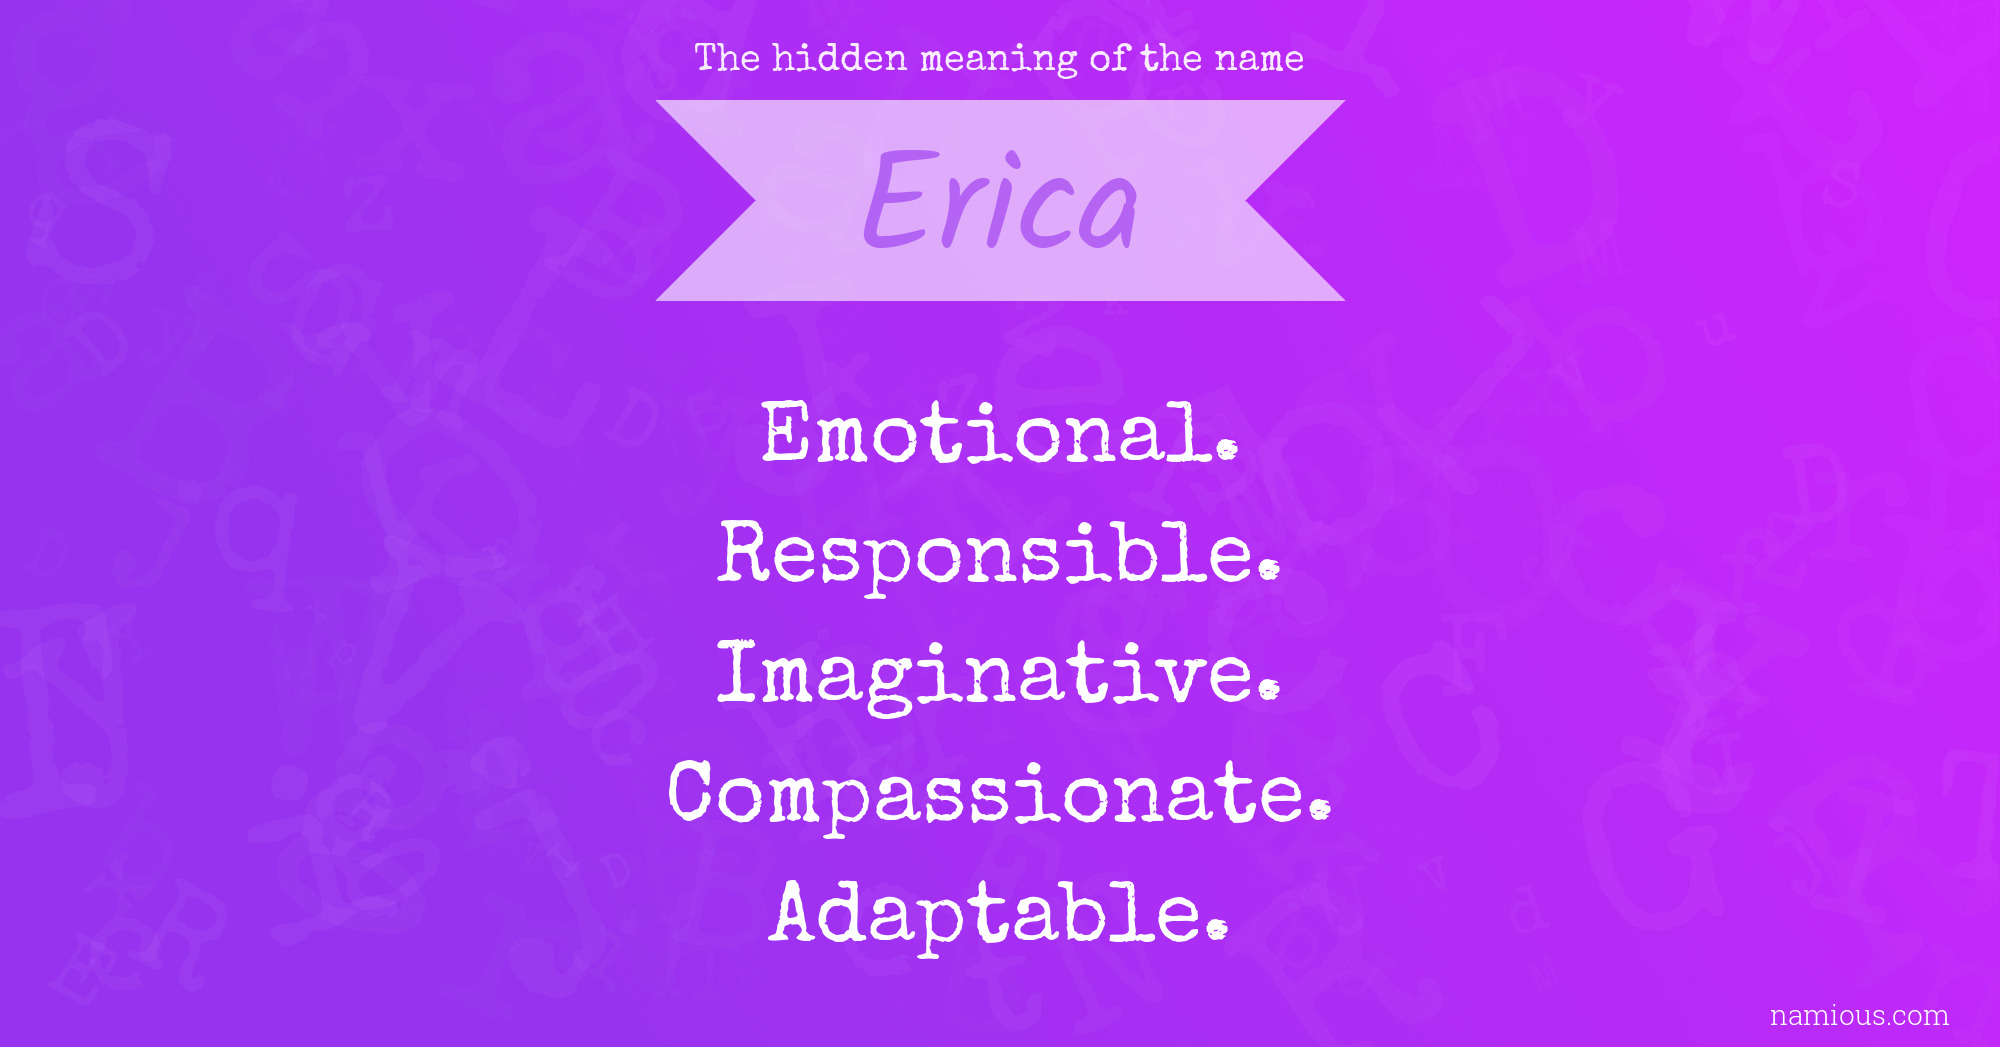 The hidden meaning of the name Erica